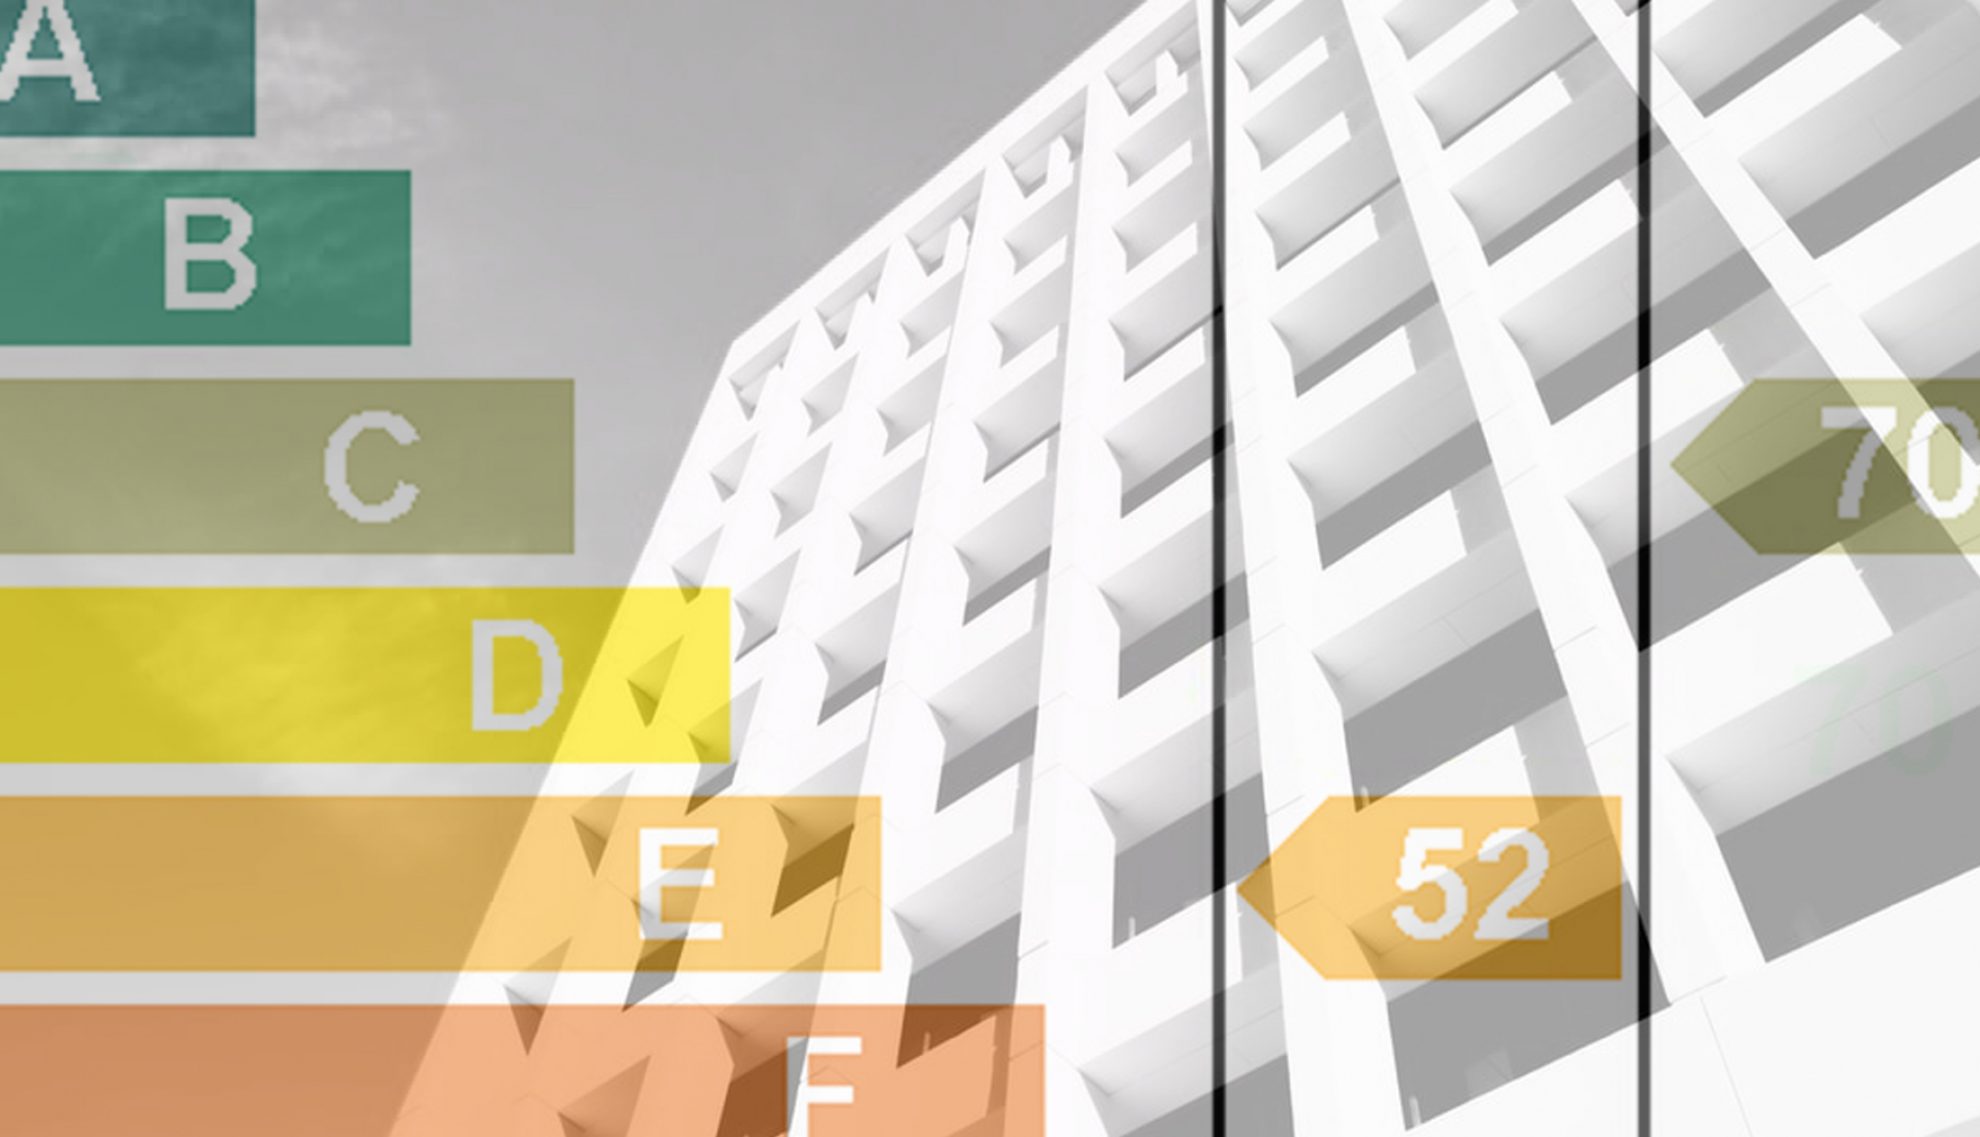 Buildings with EPC rating superimposed